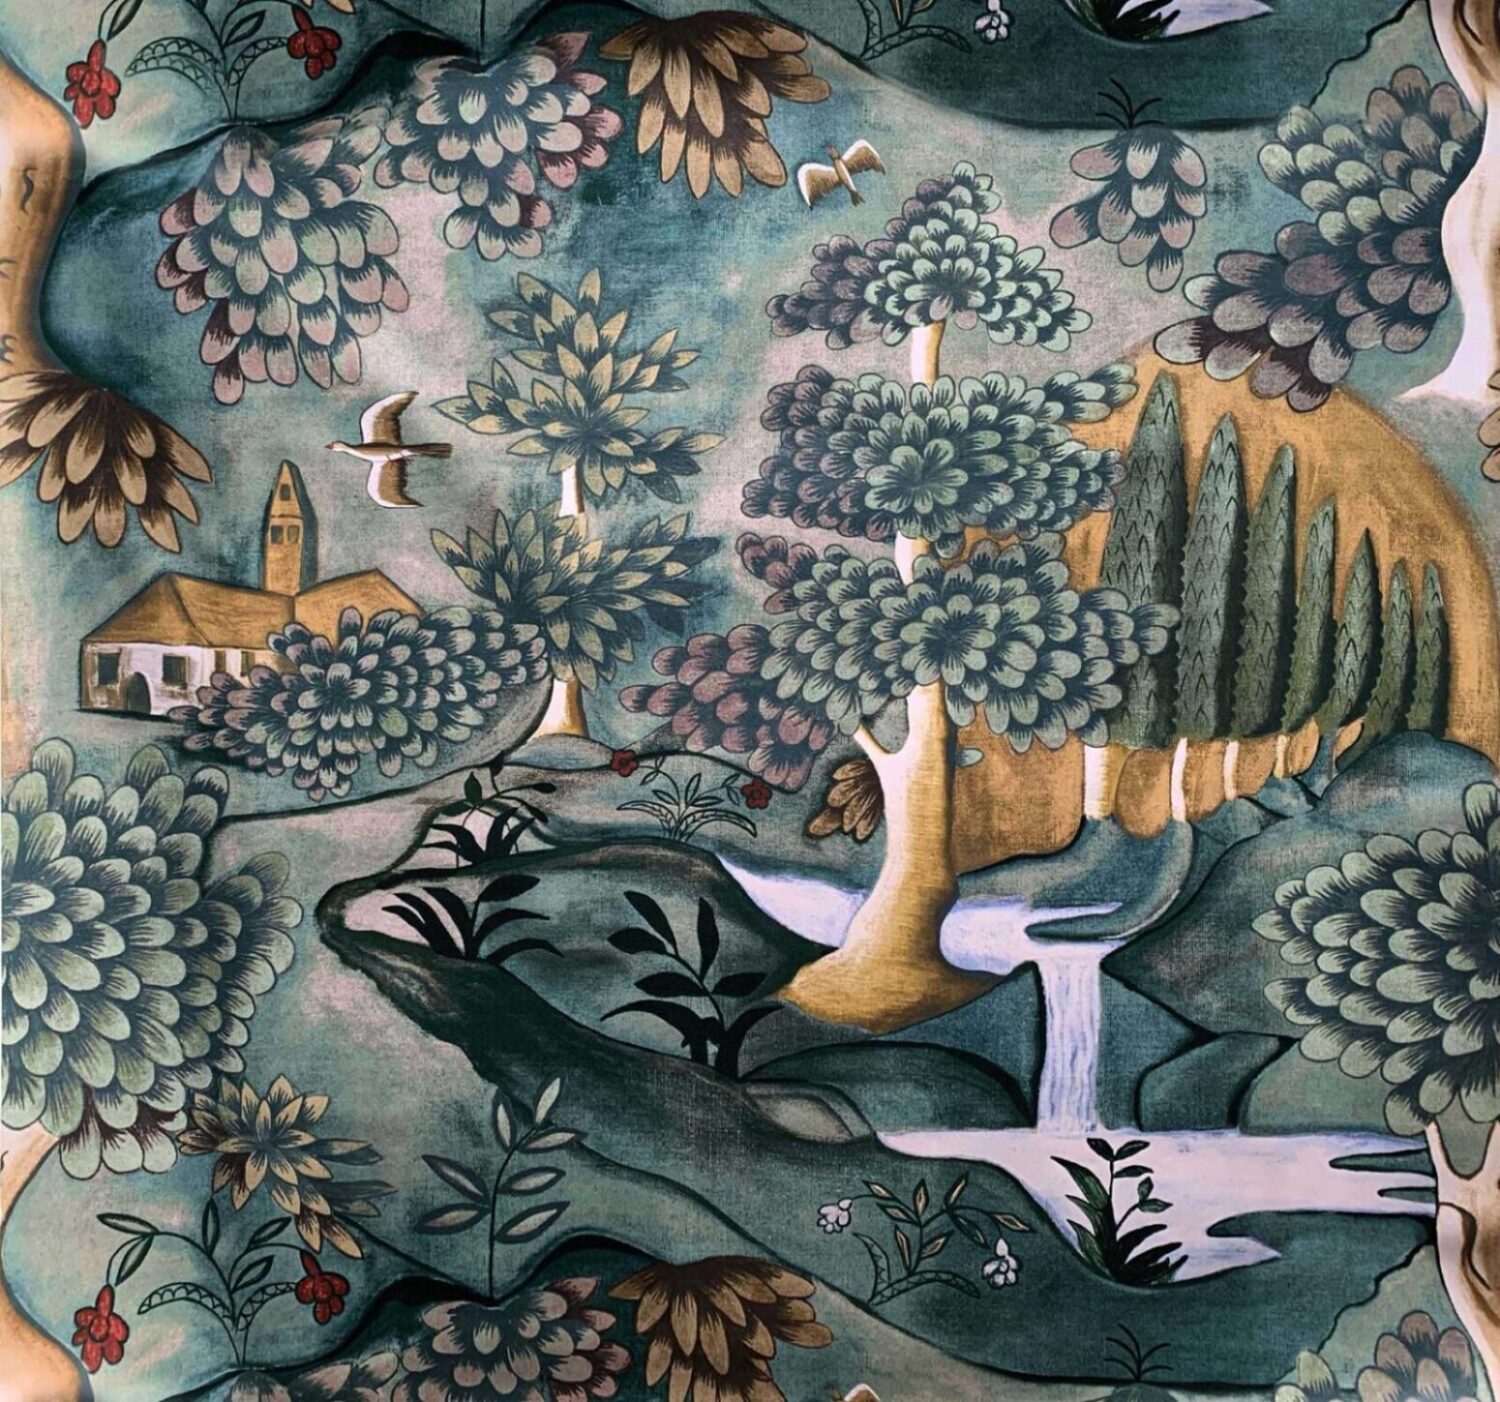 Artistic painting portraying a woodland with soaring birds, winding river, and a central residence.